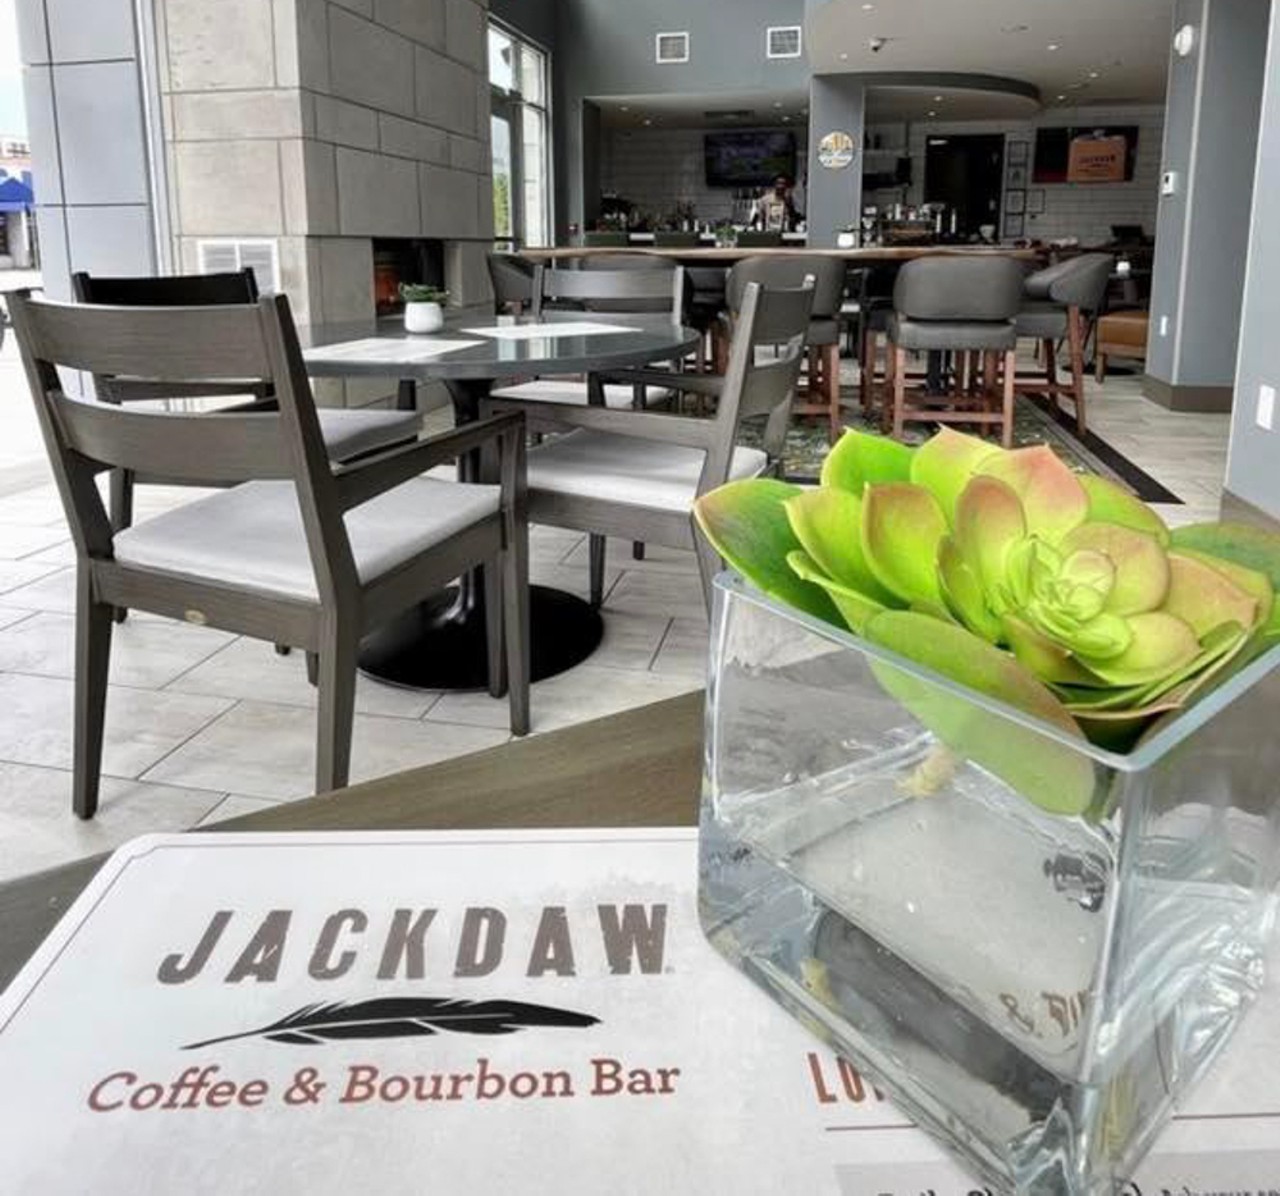  Jackdaw Coffee & Bourbon Bar  
120 S. Floyd St. (inside the Cambria Hotel) 
Though not a traditional Irish venue in the same sense as other venues on this list, Jackdaw (whose name comes from a bird commonly found in Ireland) serves Irish soda bread, &#147;Irish nachos,&#148; and corned beef sandwiches.